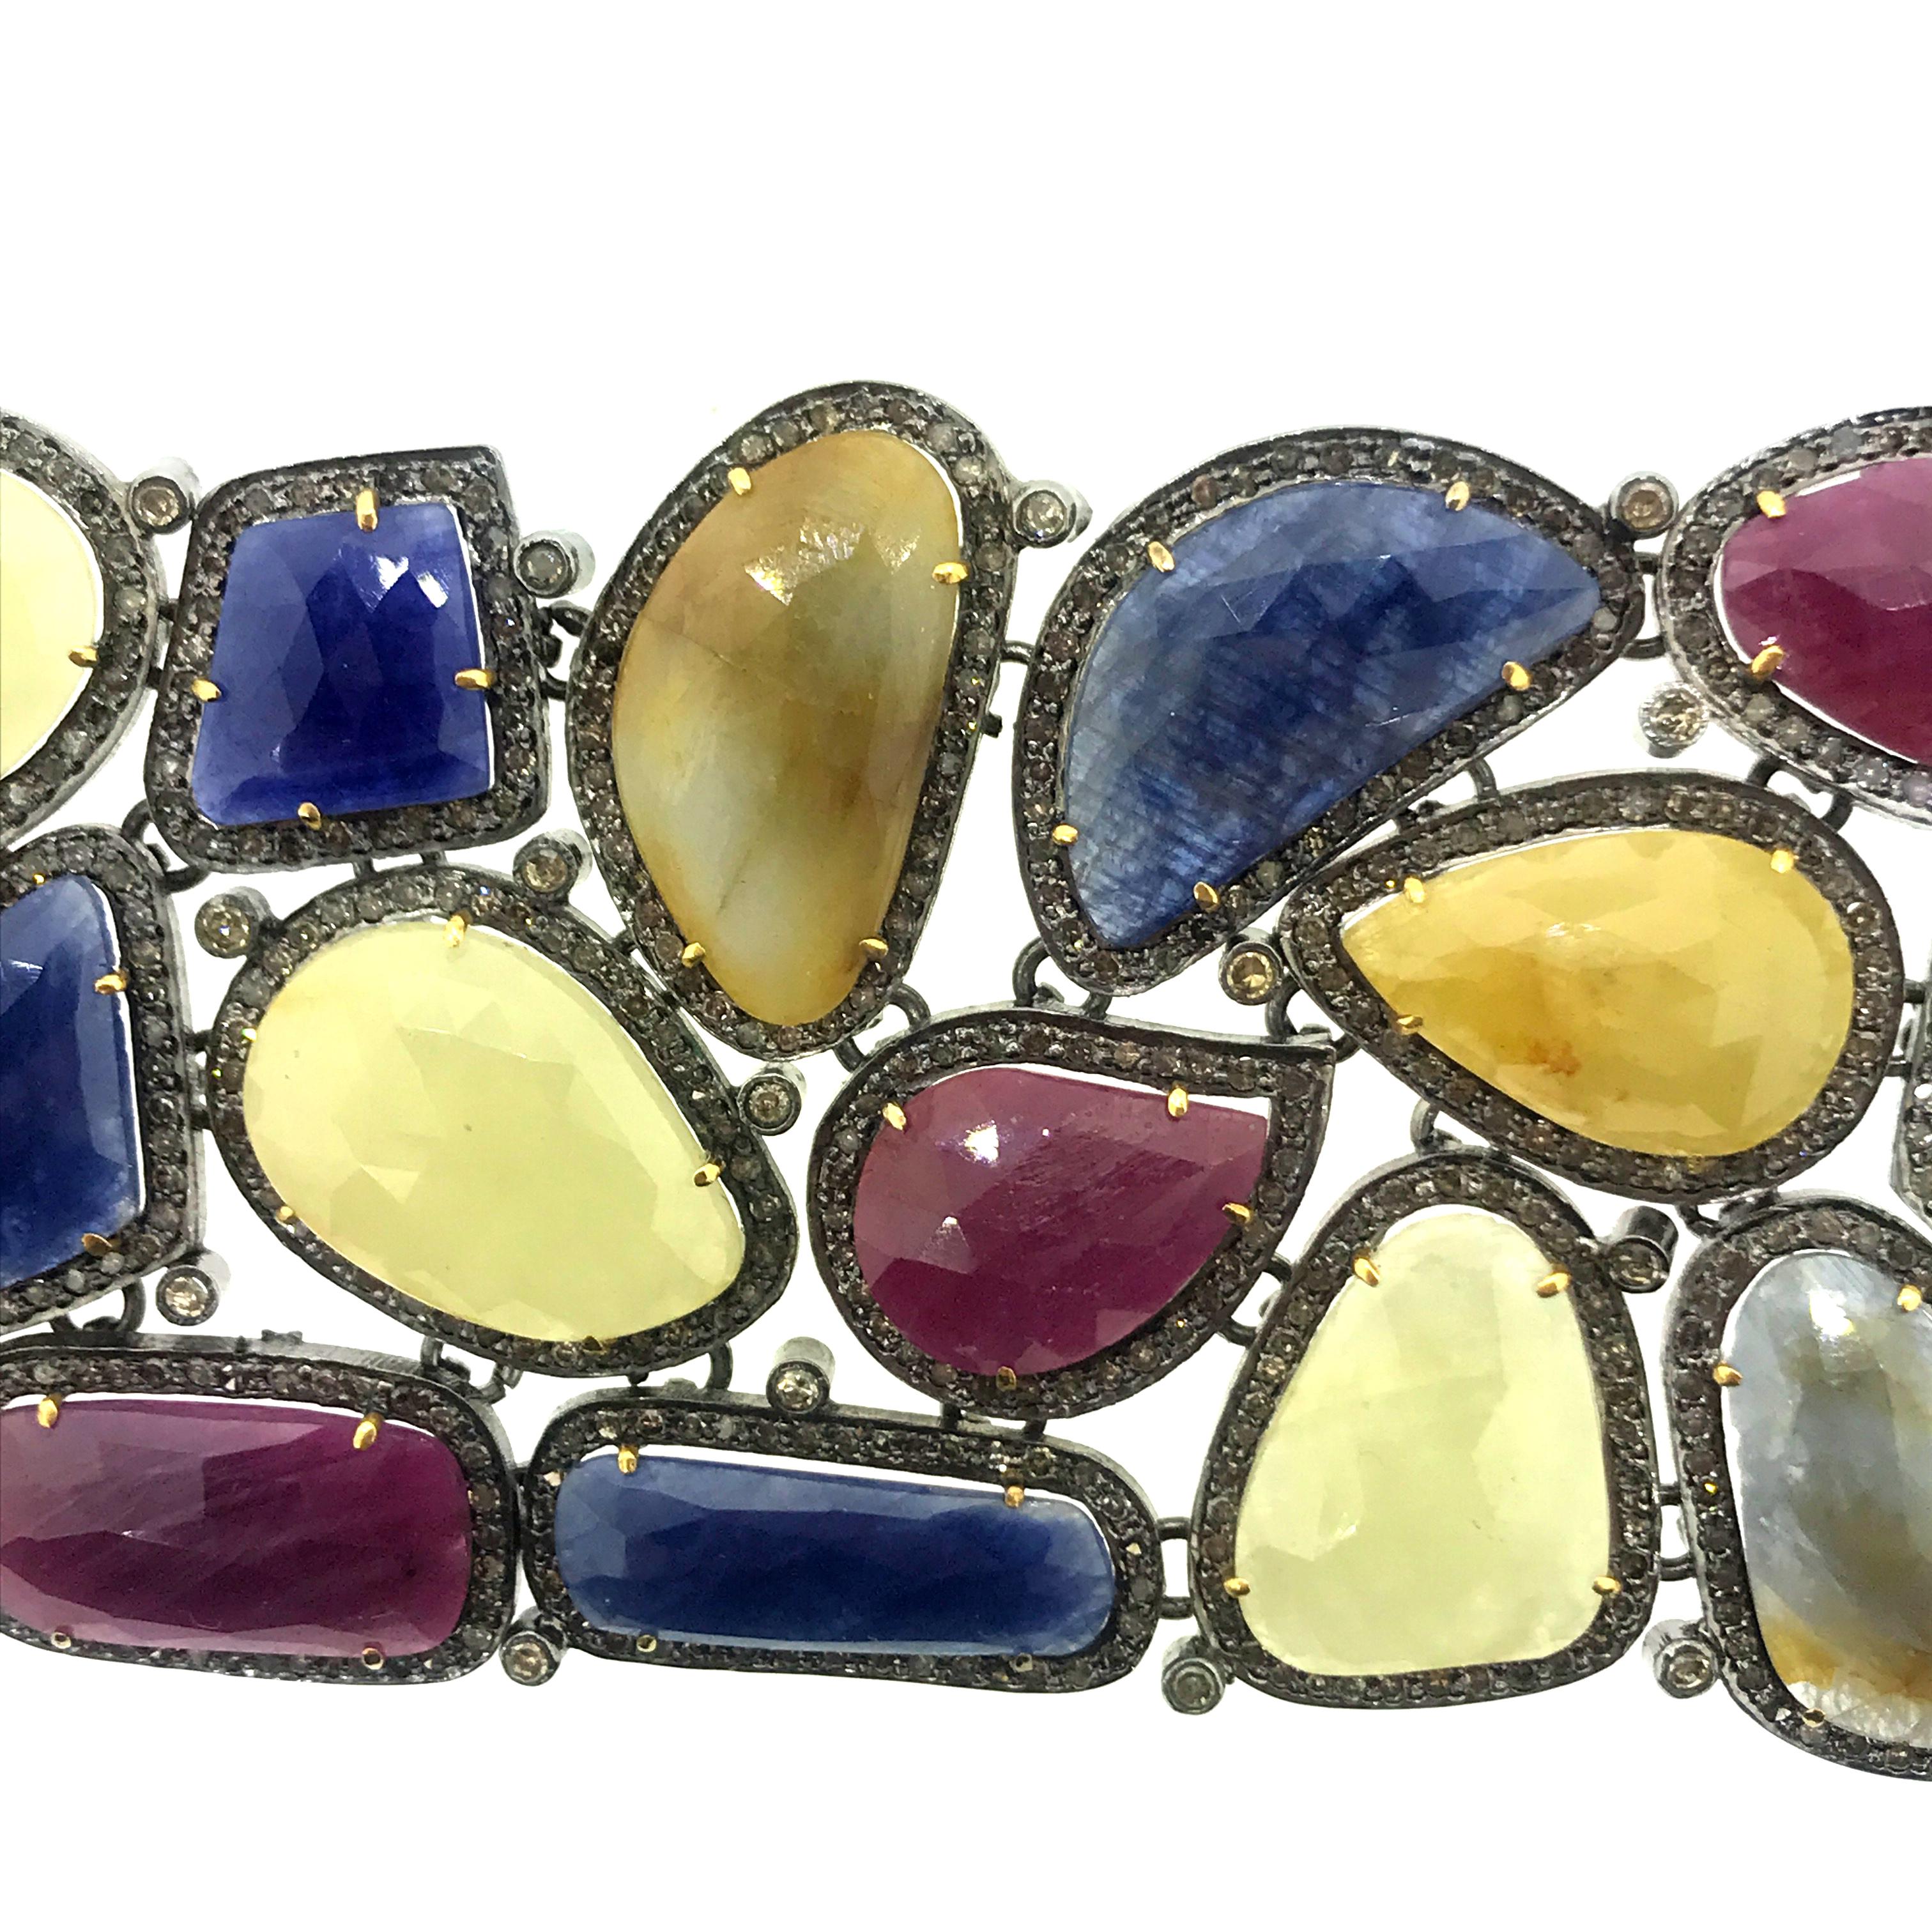 8 Inch Long 242.40 ct Multi Sliced Sapphire and 11.30 ct Champagne Diamond Bracelet set in Oxidized Sterling Silver with 14K Gold safety. It is one of  a kind bracelet with perfectly matched colors of sliced sapphires. Each stone is surrounded by a